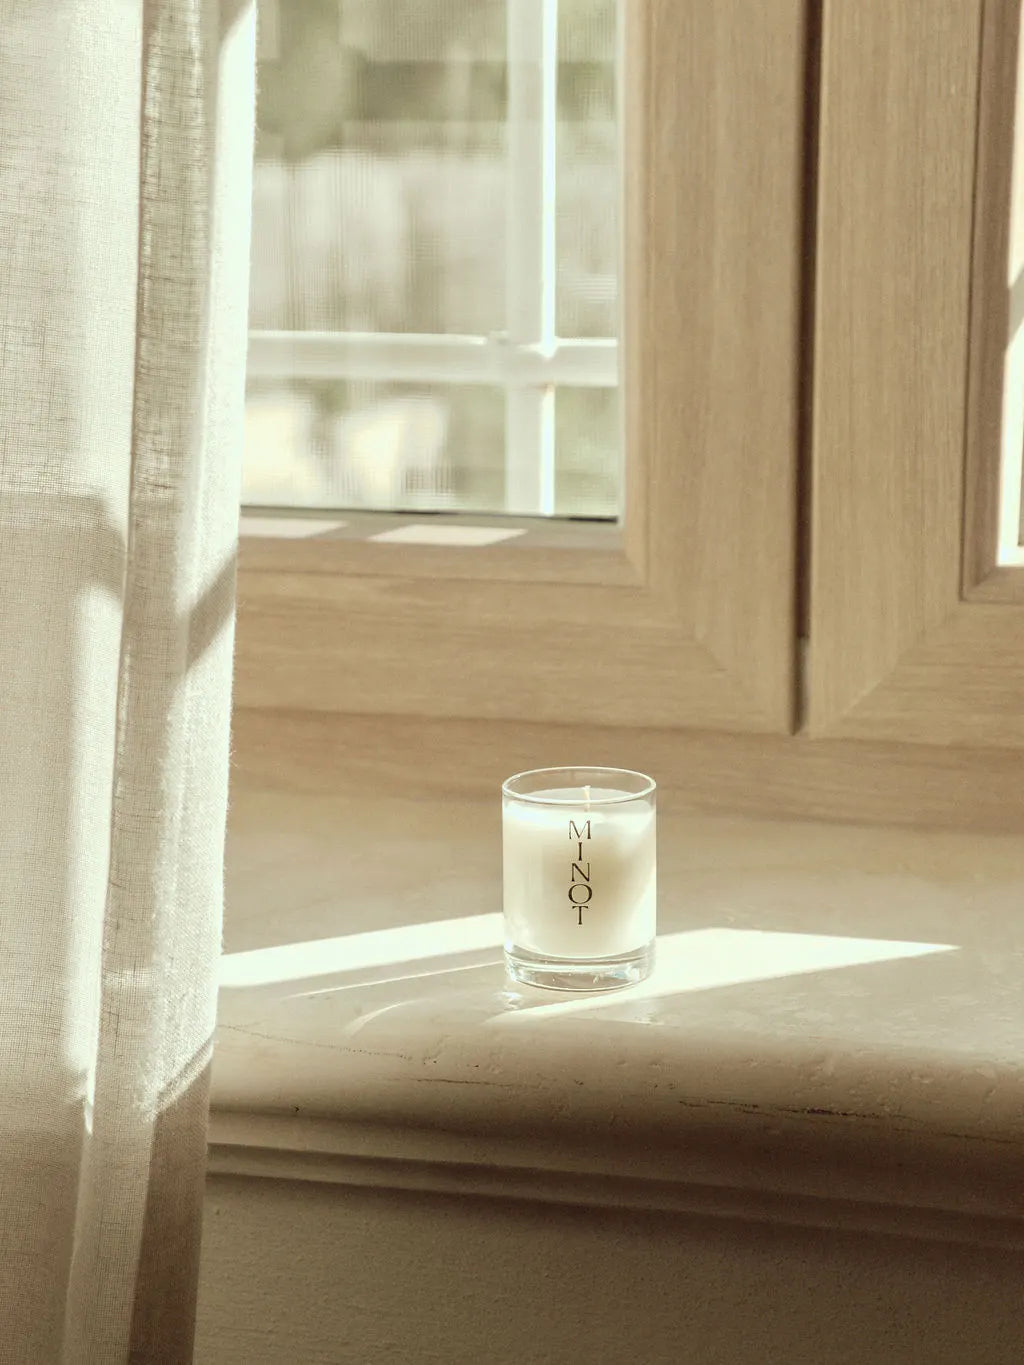 Made of soy wax and sustainable ingredients, the Sunbeam Mini candle sits in a sunny window